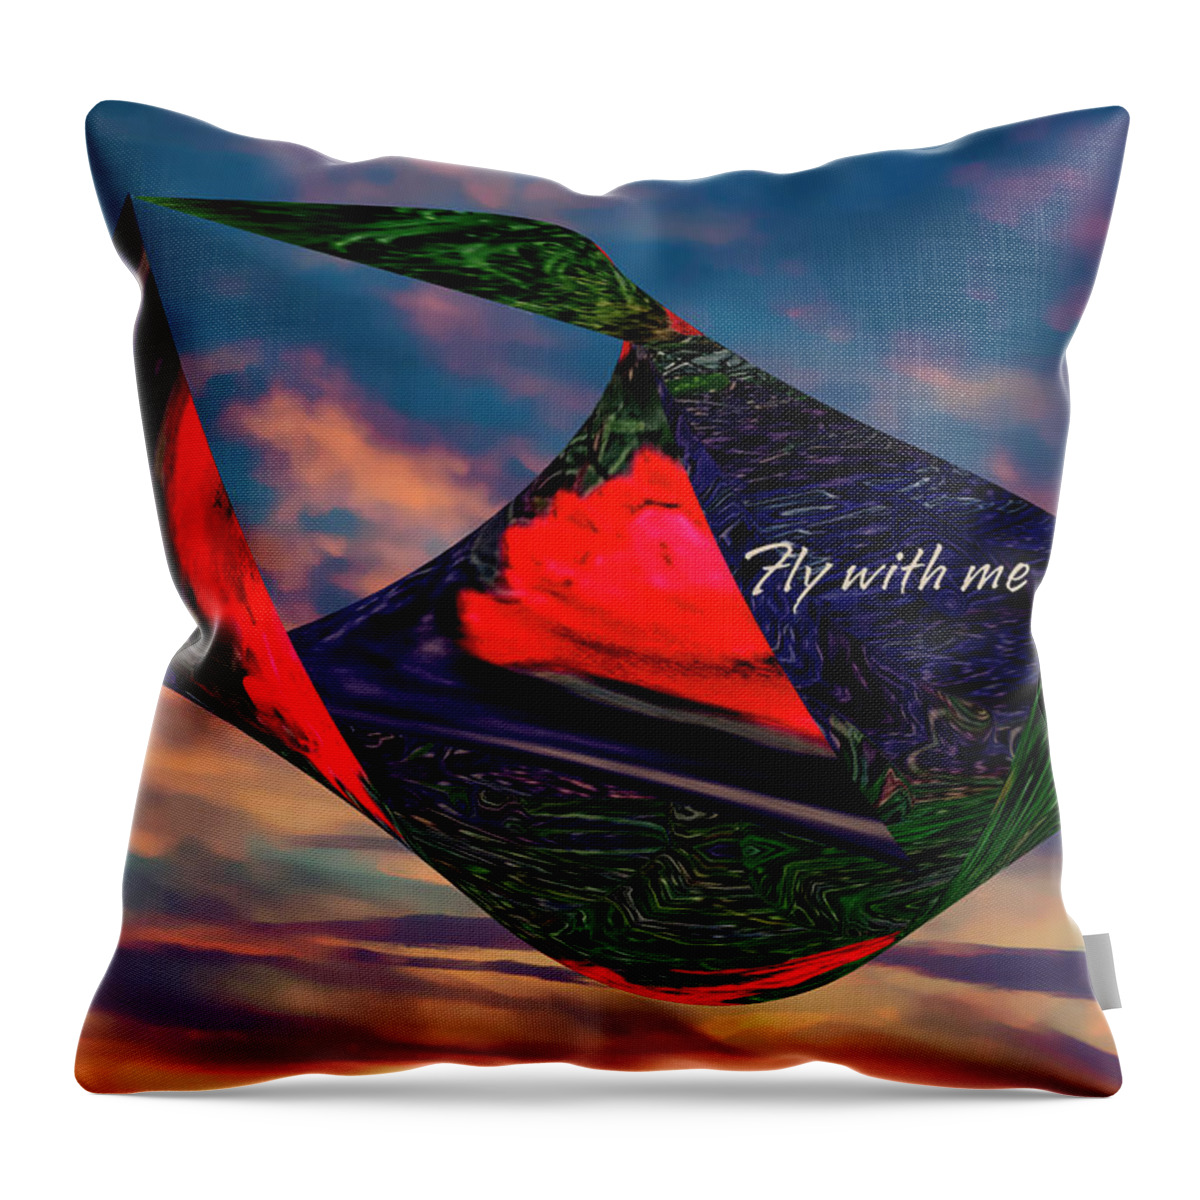 Photography Throw Pillow featuring the mixed media Fly With Me by Gerlinde Keating - Galleria GK Keating Associates Inc